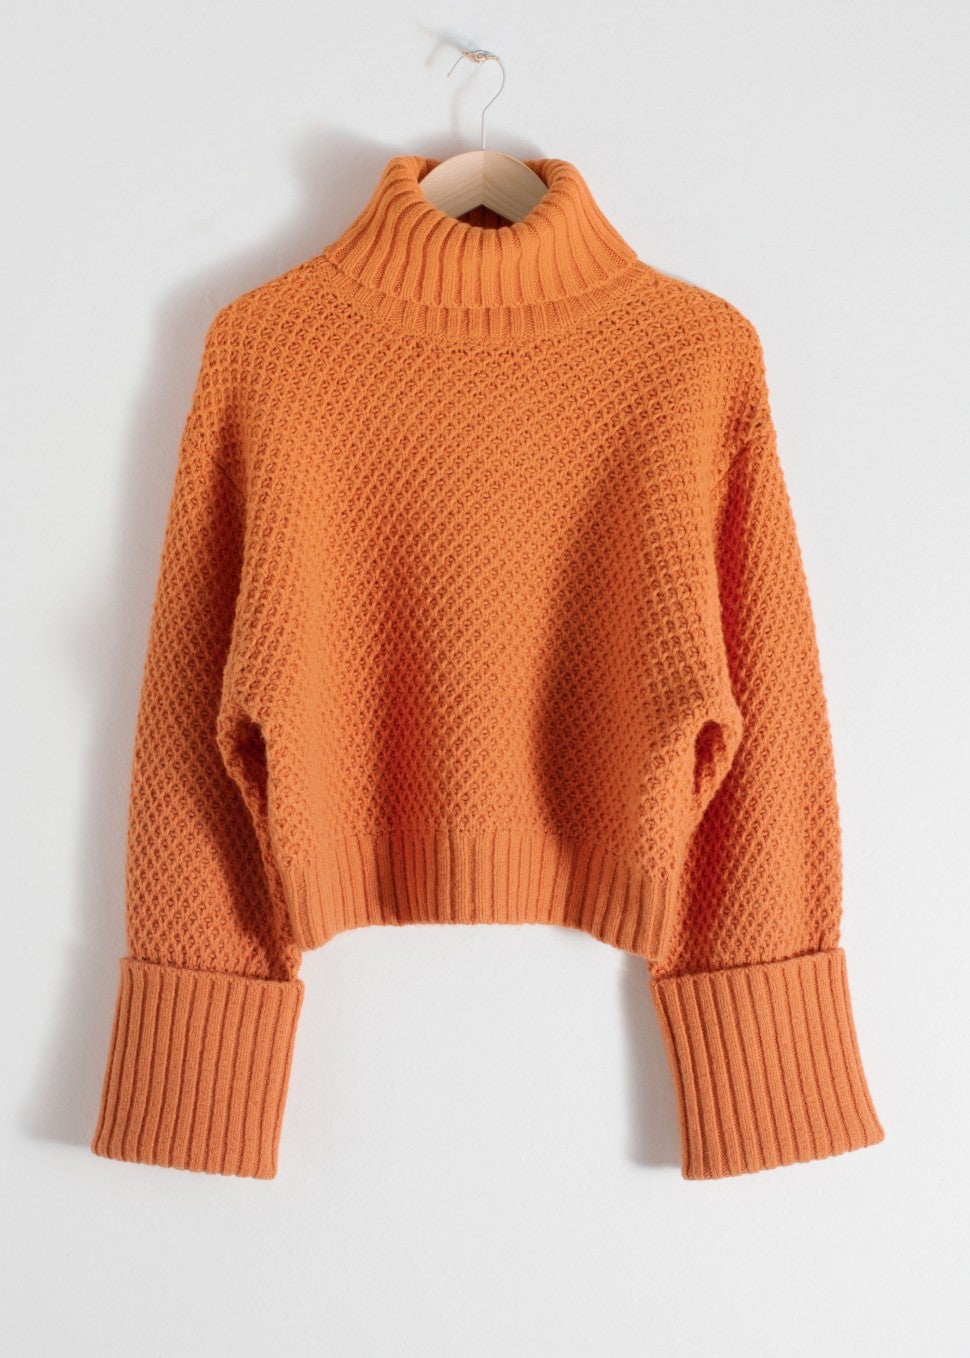 & Other Stories Cropped Wool Blend Turtleneck